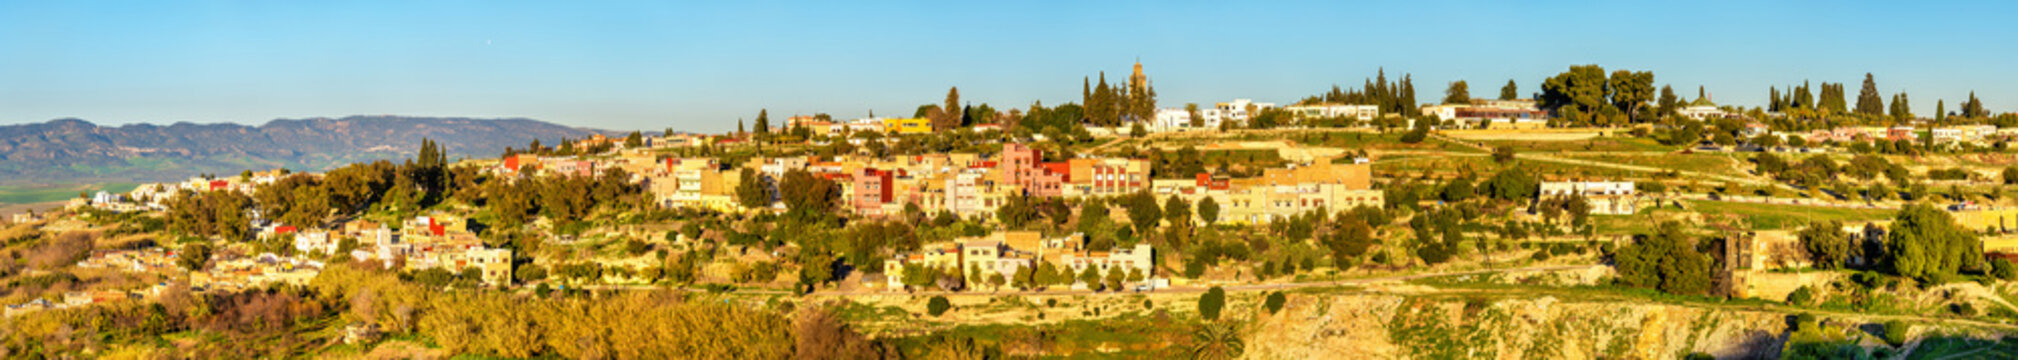 Panoramic view of Meknes in Morocco